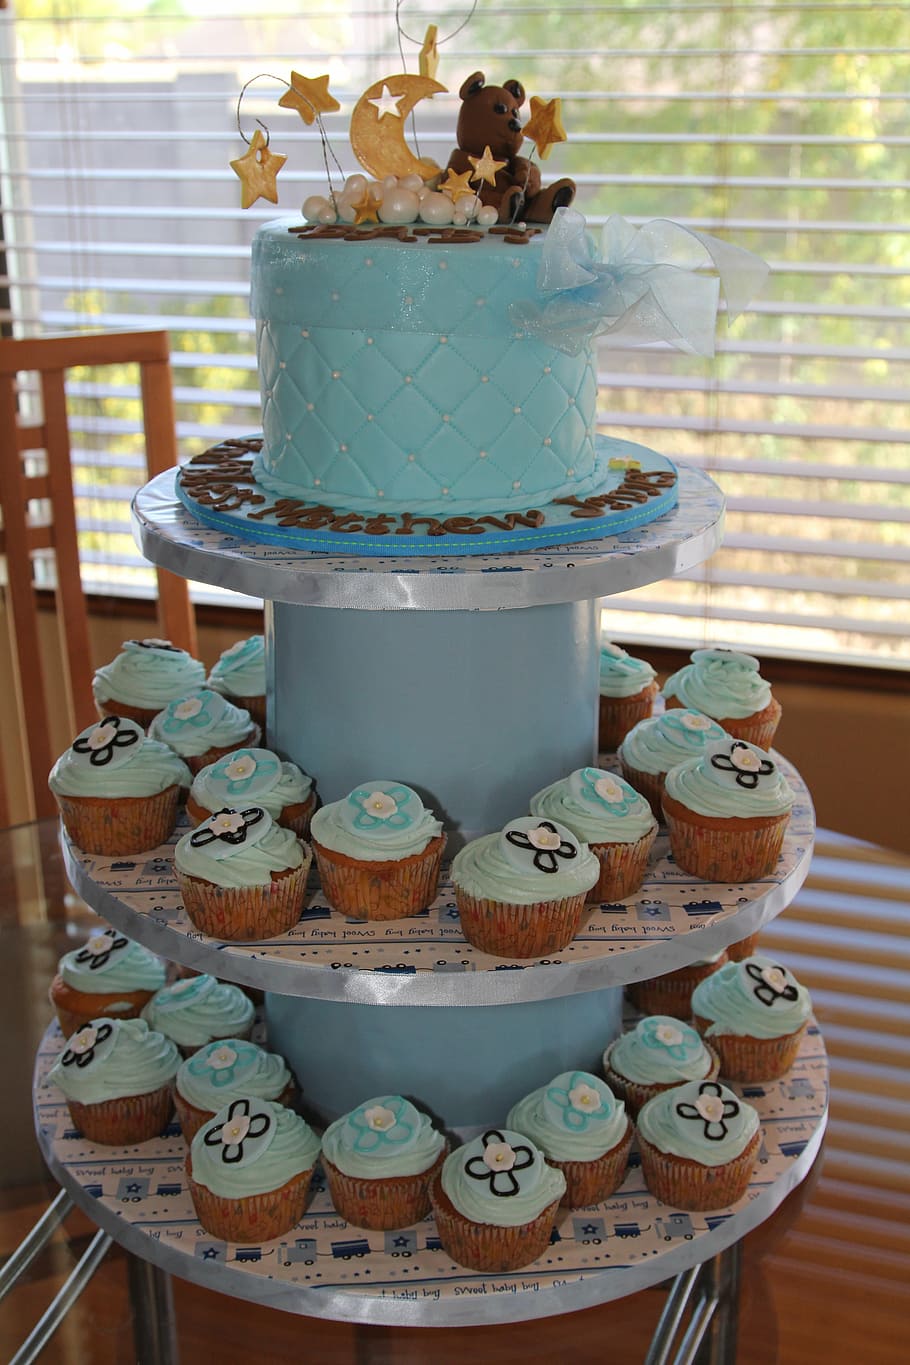 cake, baby shower, food, party, baby, sweet, dessert, sweet food, indulgence, food and drink